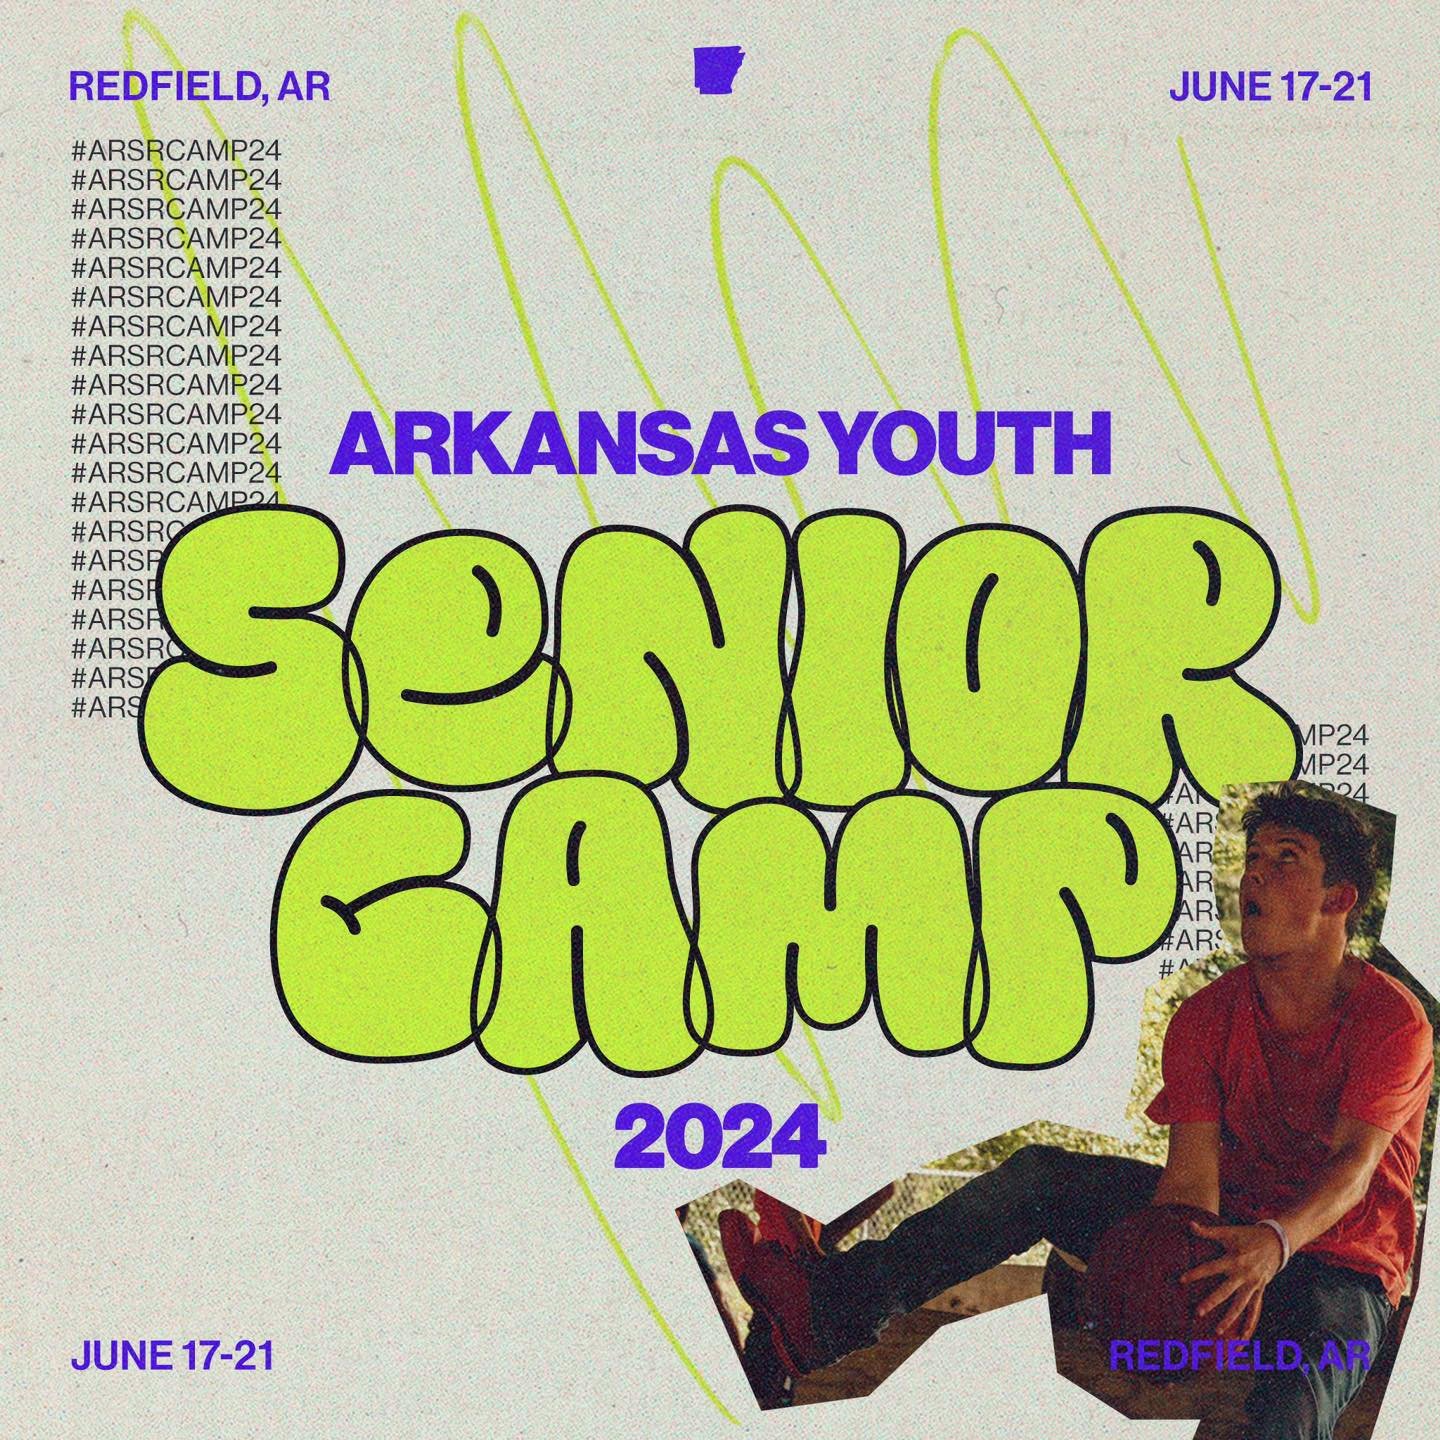 🎉 ARKANSAS YOUTH SENIOR CAMP &lsquo;24 🎉

JUNE 12-21 | AGES 15-18 

This summer is going to be like none other! God has changed so many lives &amp; futures at ARYOUTH SR. CAMPS &amp; we believe He will do it this year!

Make sure to register at ary